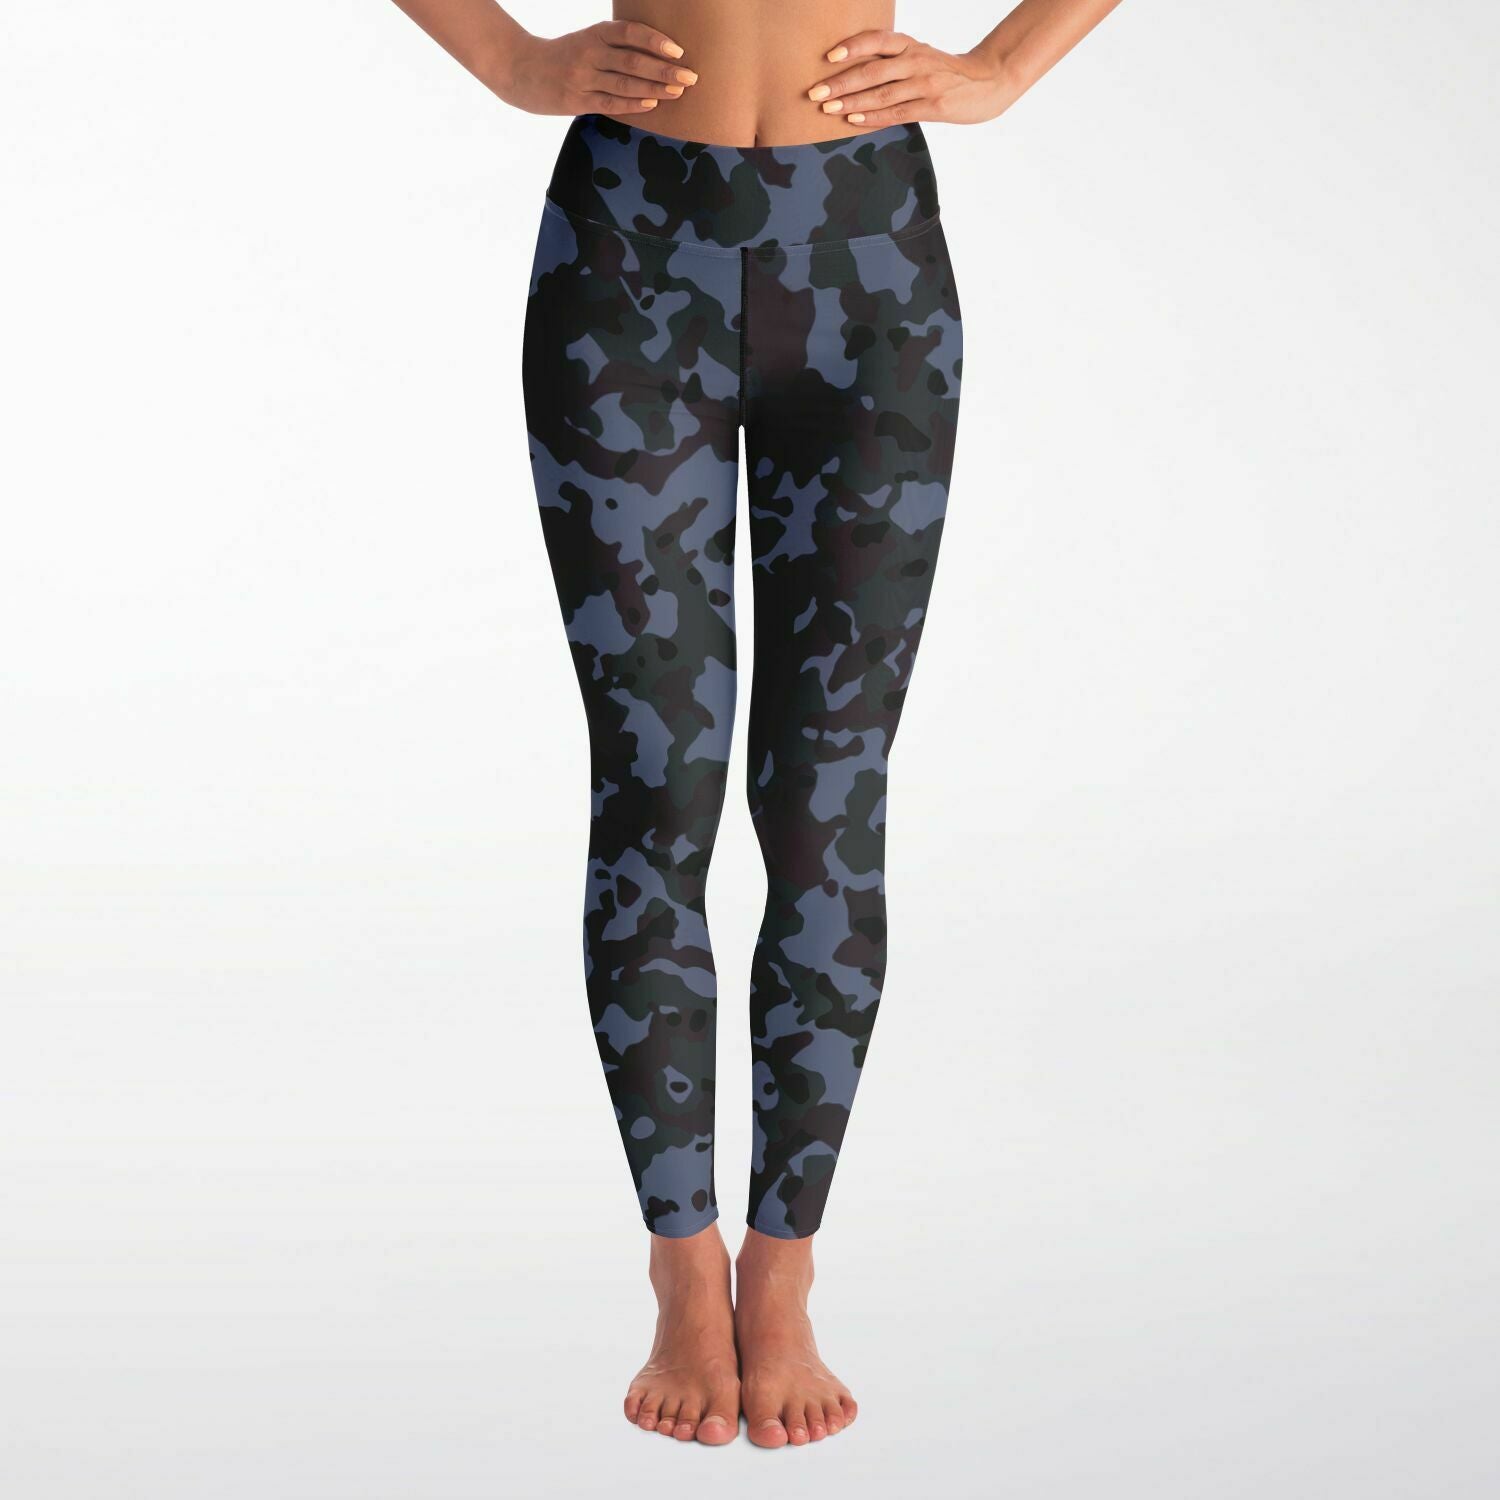 fitbodyclothing on X: Camo High Tights on SALE this month